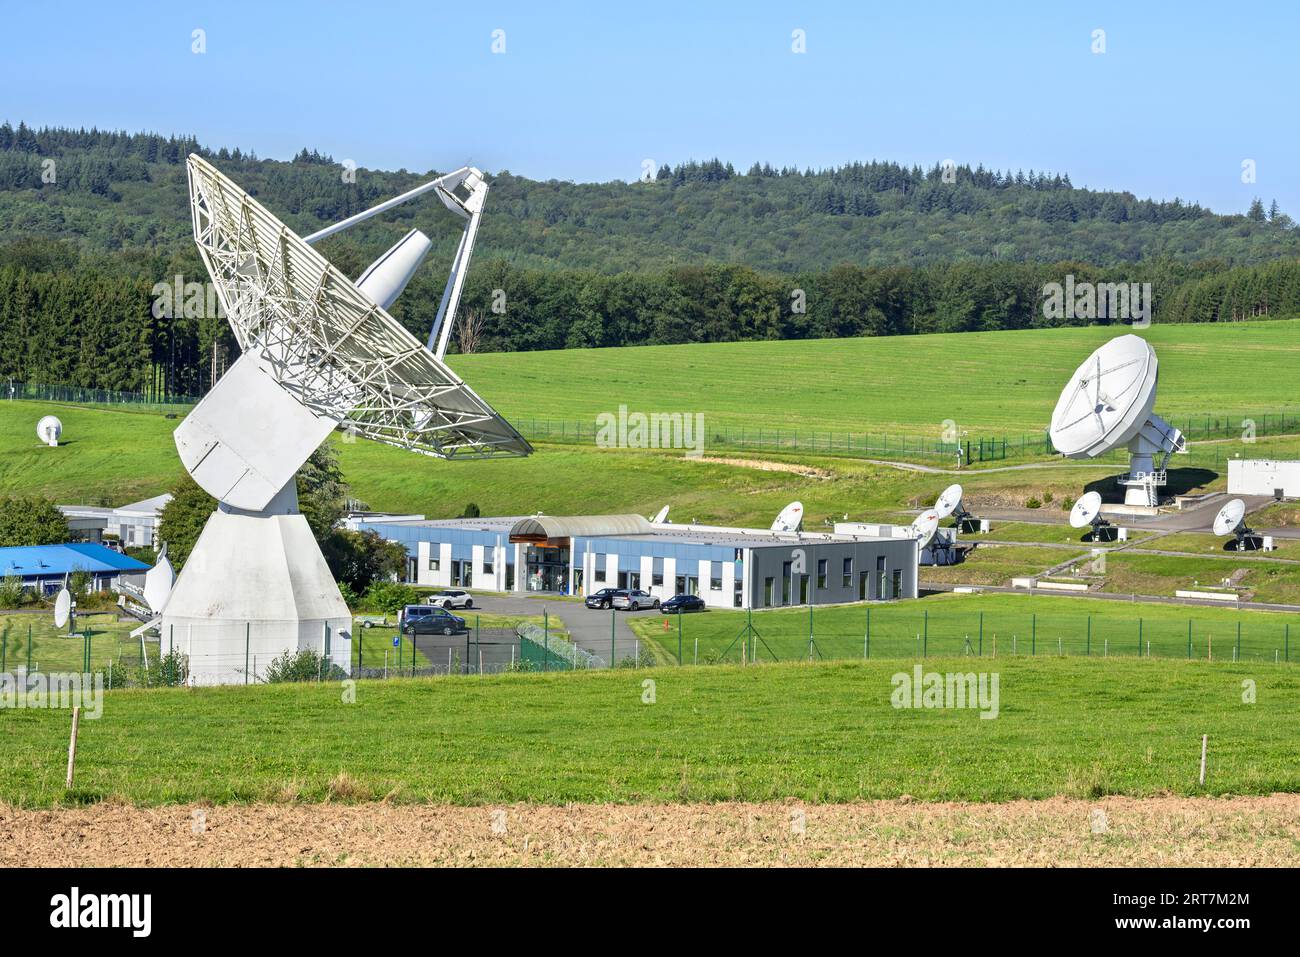 Galileo antennas at the Redu Station, ESTRACK radio antenna station for communication with spacecraft at Libin, Luxembourg, Wallonia, Belgium Stock Photo